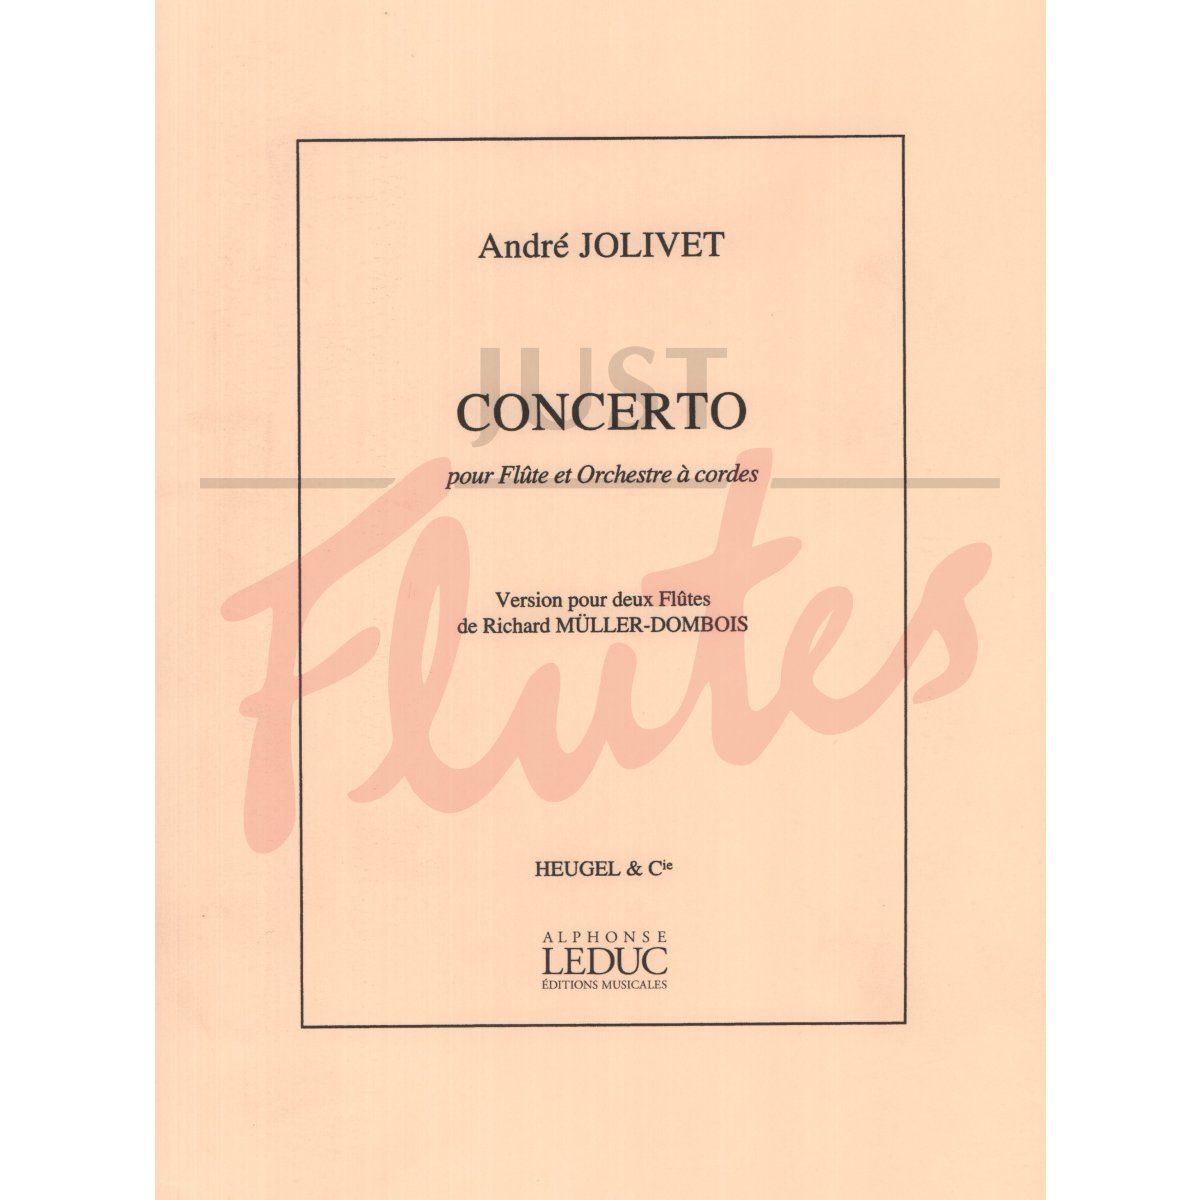 Concerto for Flute and Orchestra, arranged for Two Flutes 